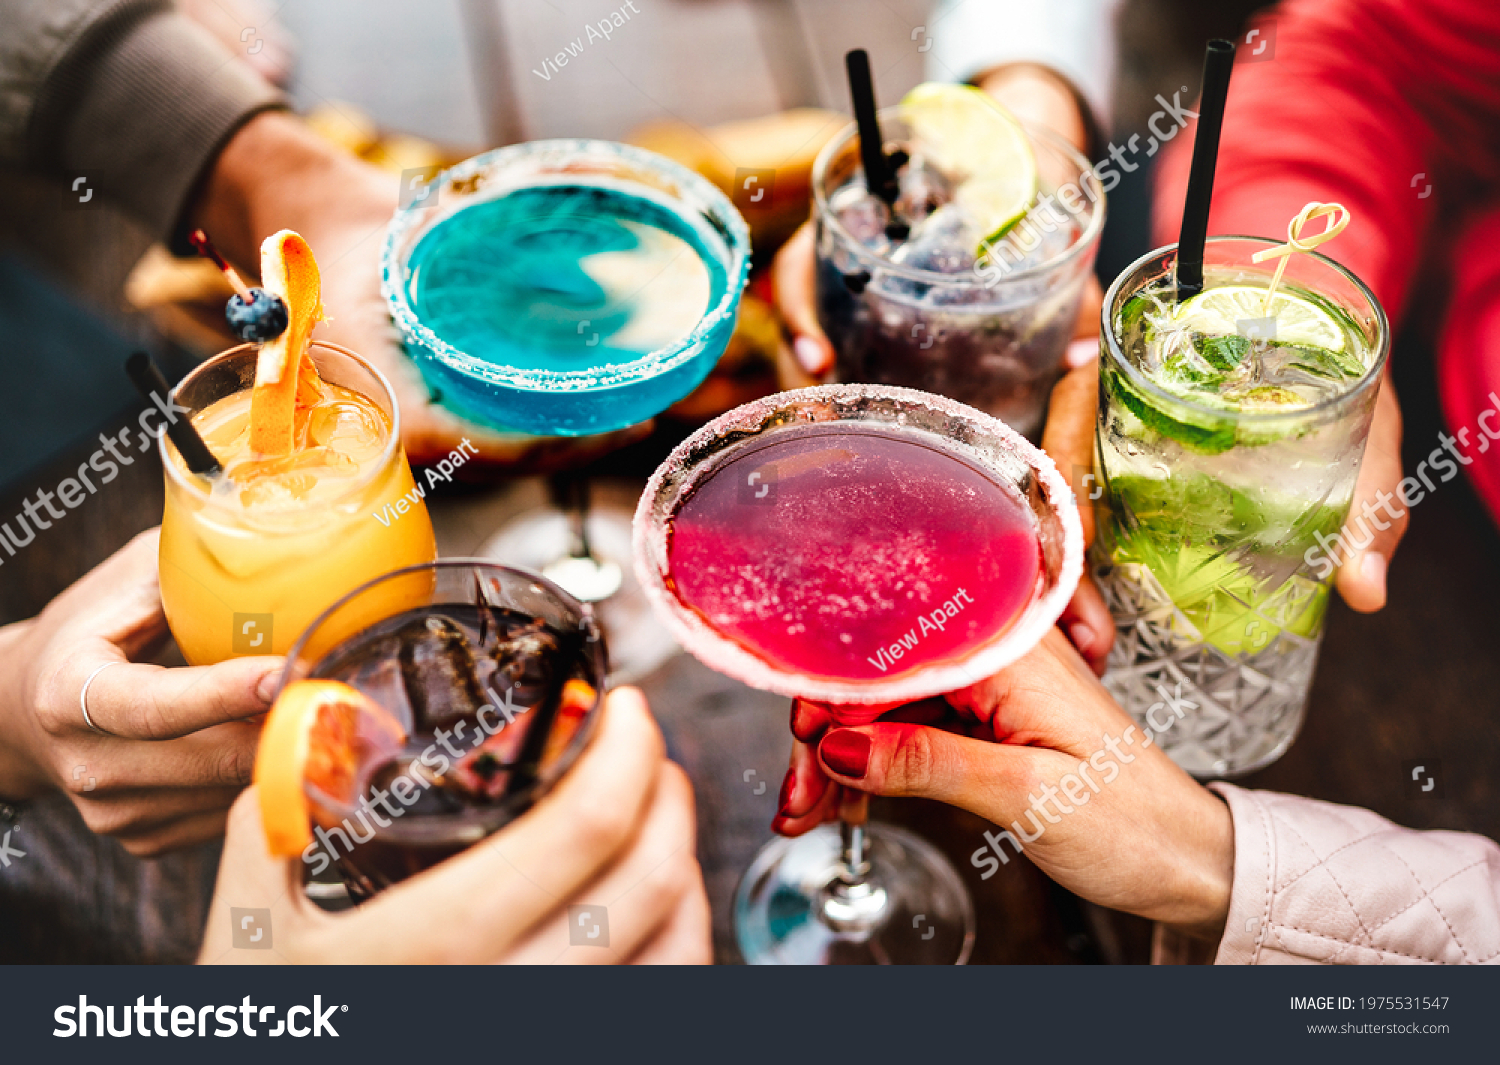 People hands toasting multicolored fancy drinks - Young friends having fun together drinking cocktails at happy hour - Social gathering party time concept on warm vivid filter - Shallow depth of field #1975531547